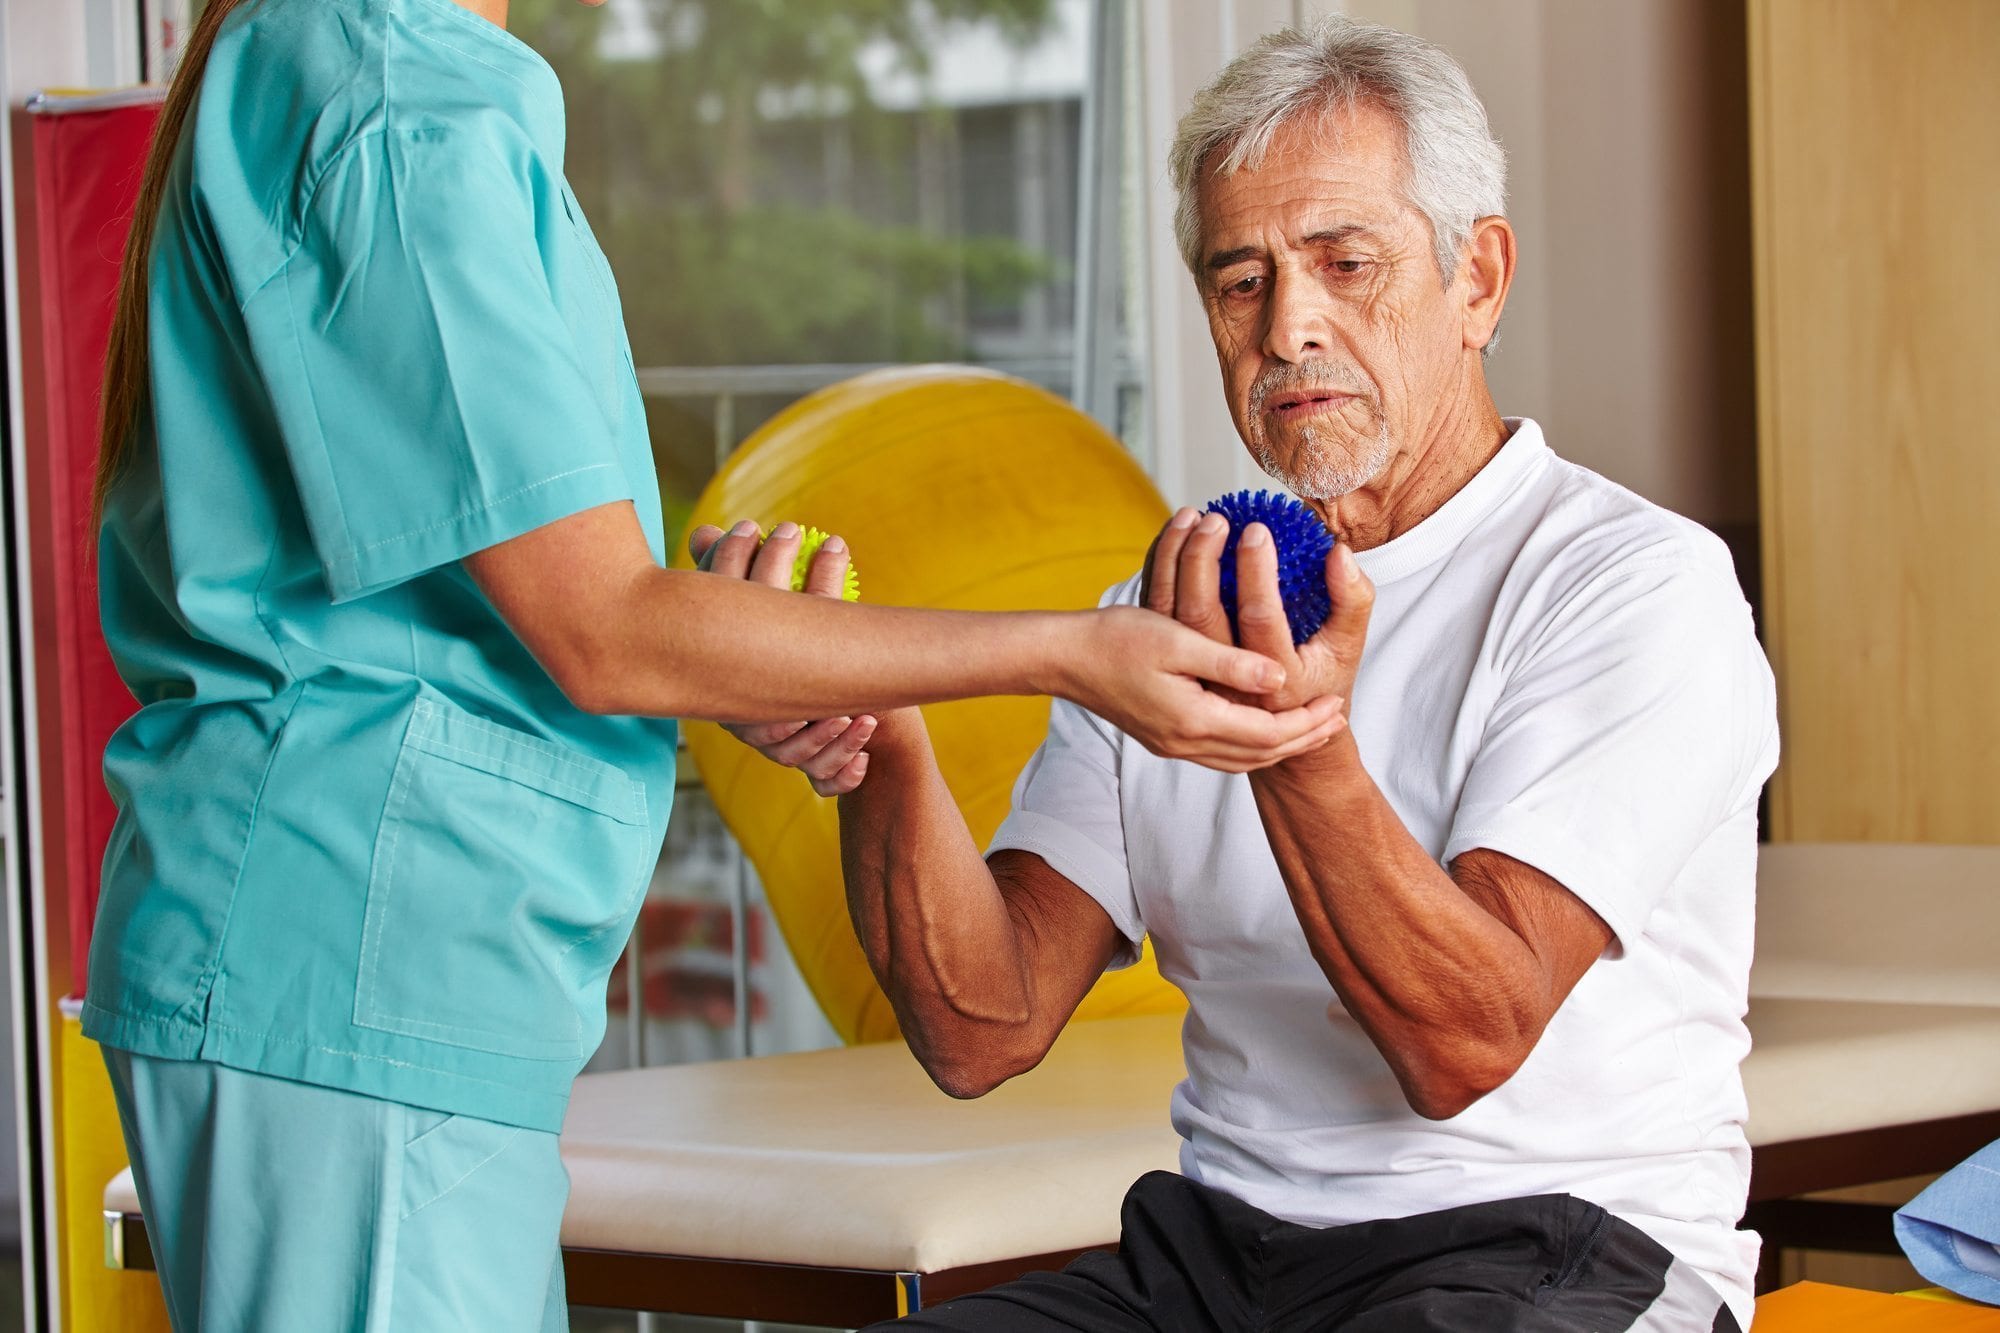 Senior problems that can be treated with physical therapy